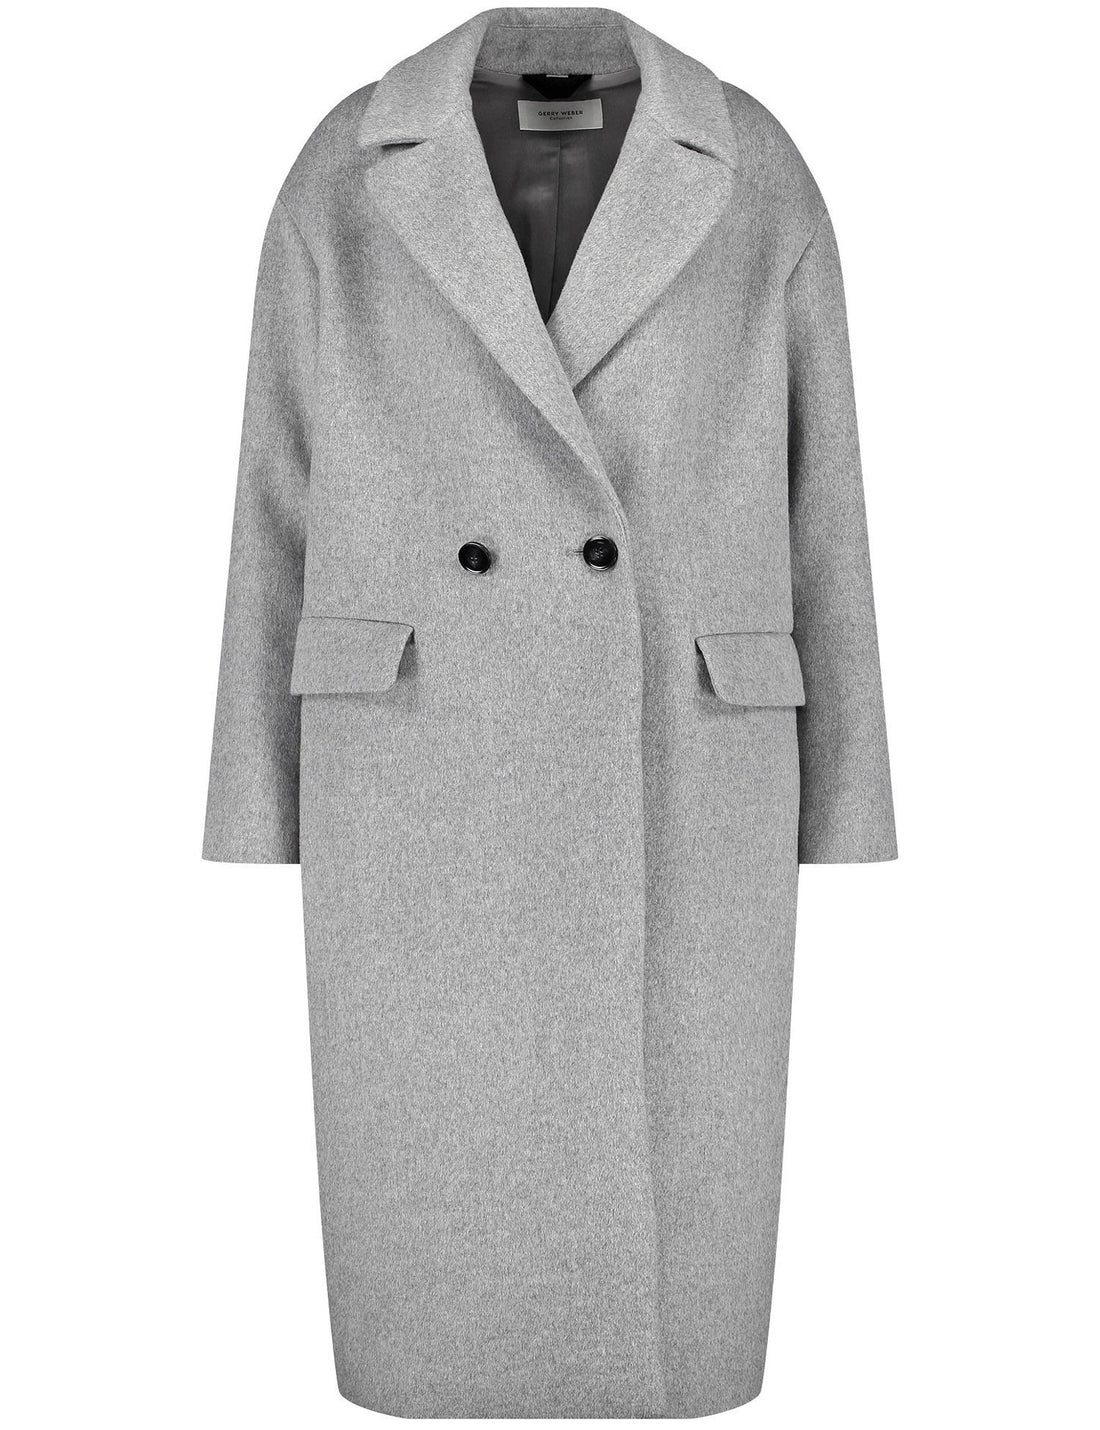 Coat In A Slightly Oversized Cut With Wool_250014-31135_20348_02